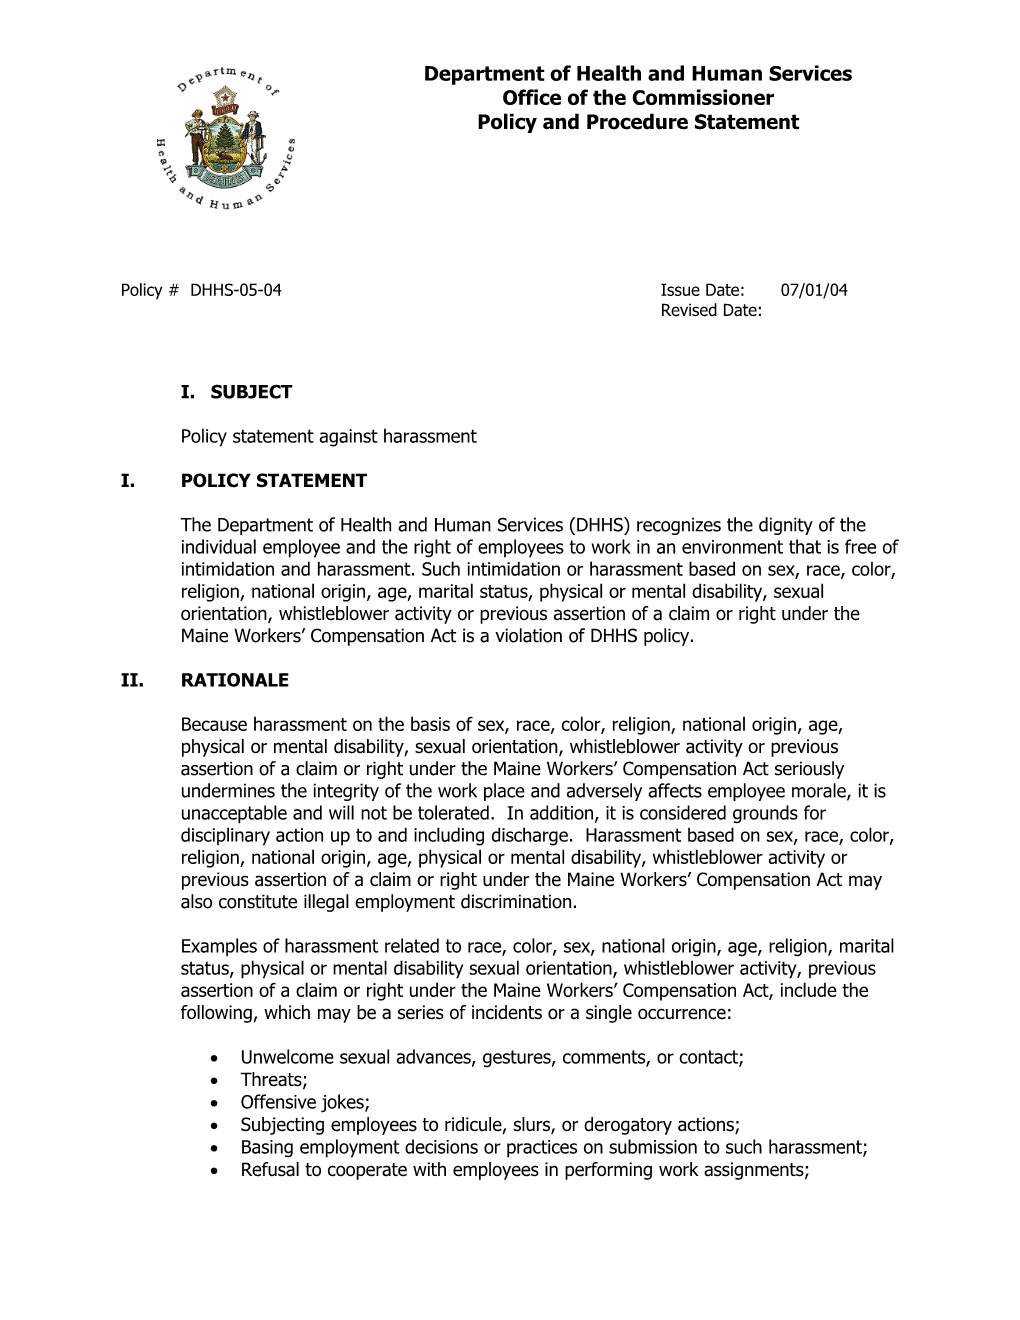 Policy Statement Against Harassment